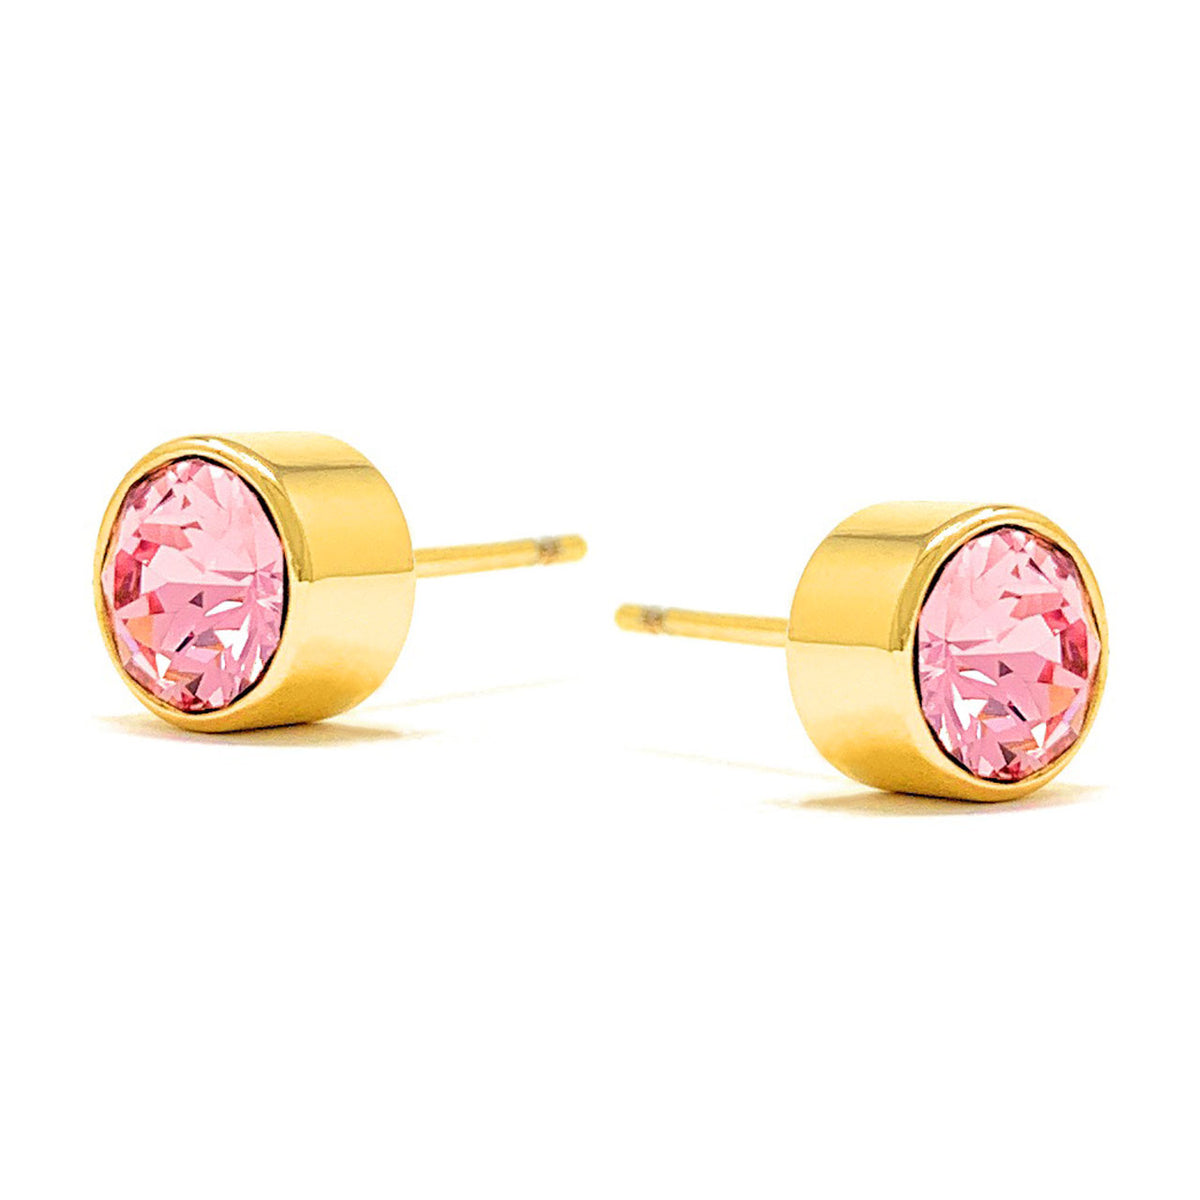 Harley Small Stud Earrings with Pink Light Rose Round Crystals from Swarovski Gold Plated - Ed Heart